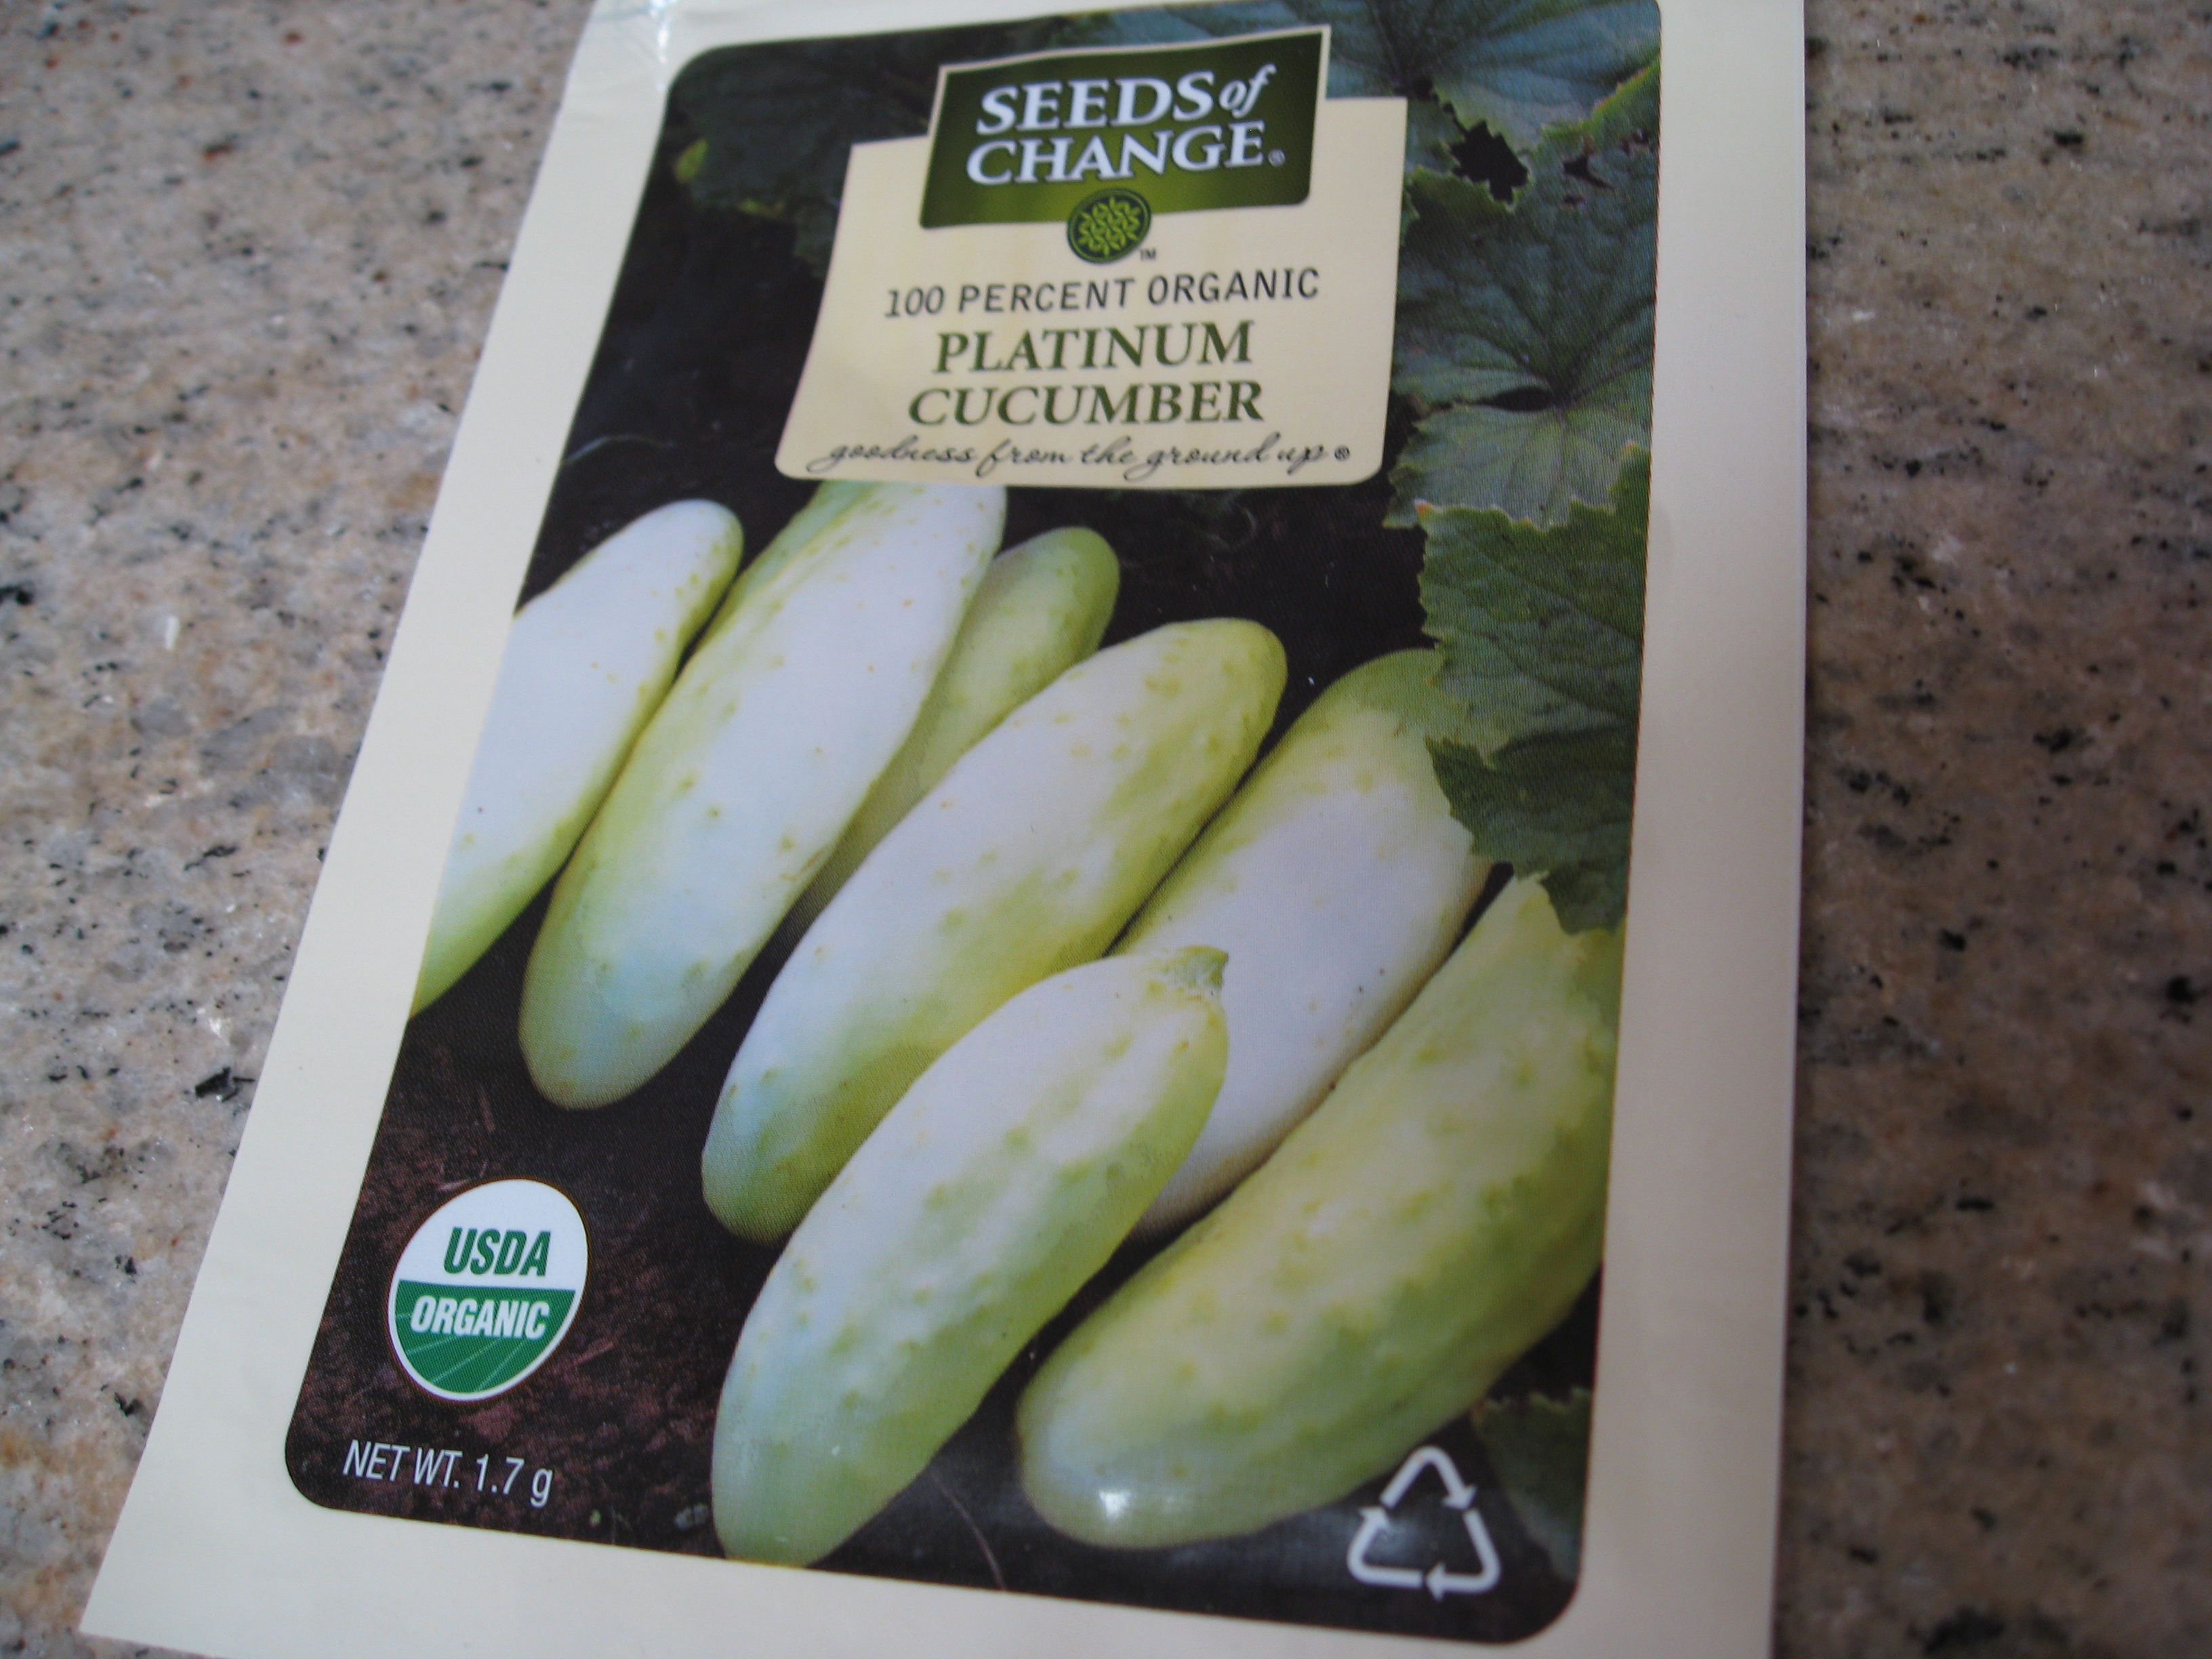 Another new one for us, Platinum Cucumber.